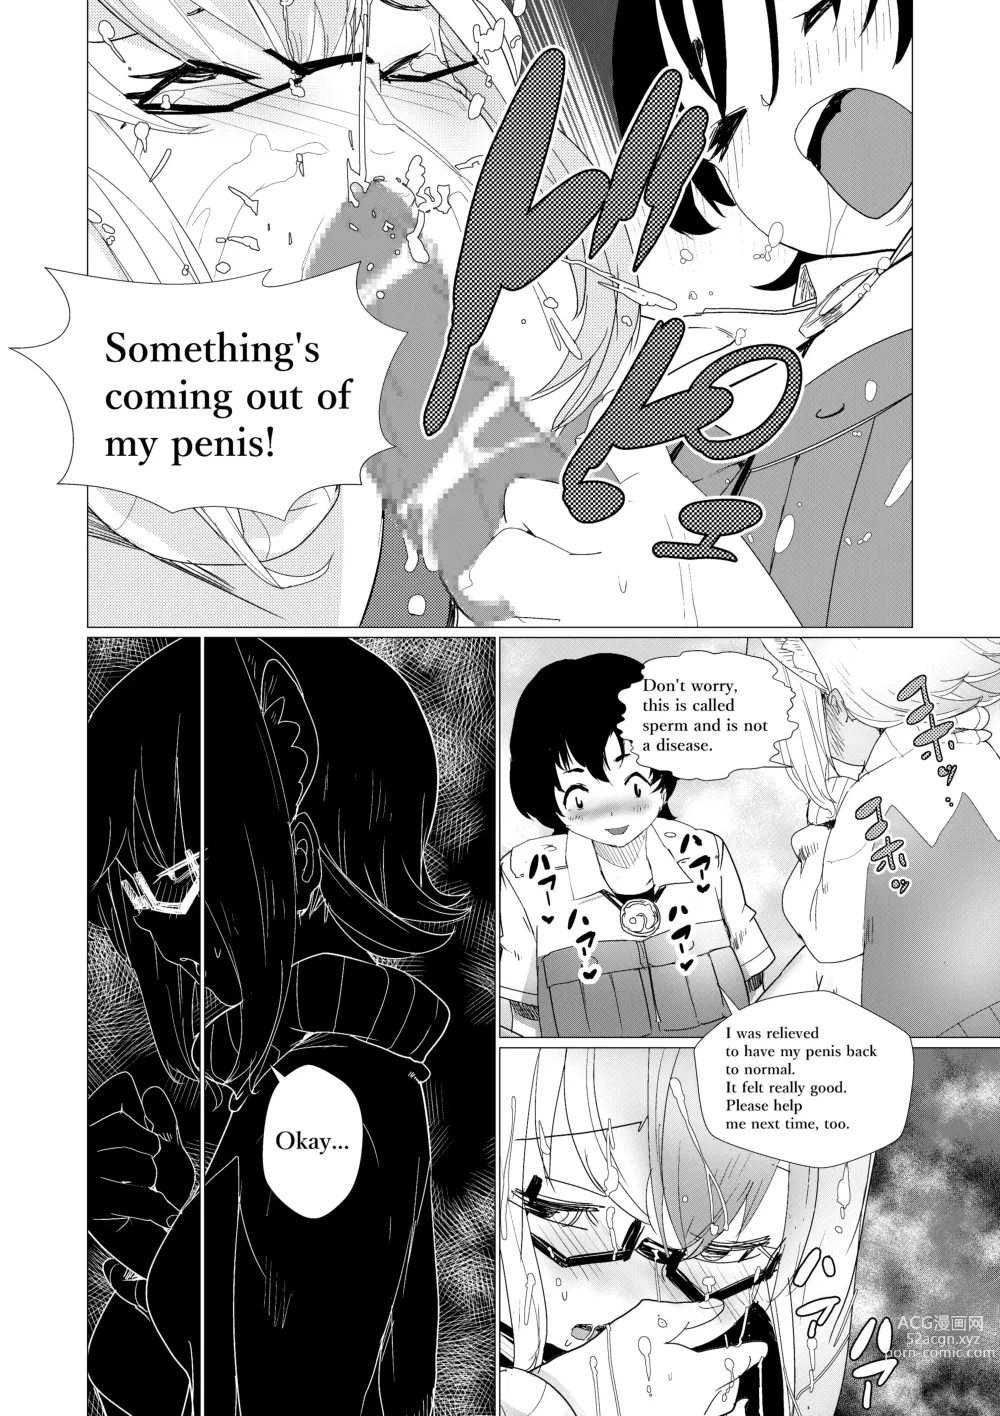 Page 36 of doujinshi Sensei... My Penis is Going Crazy